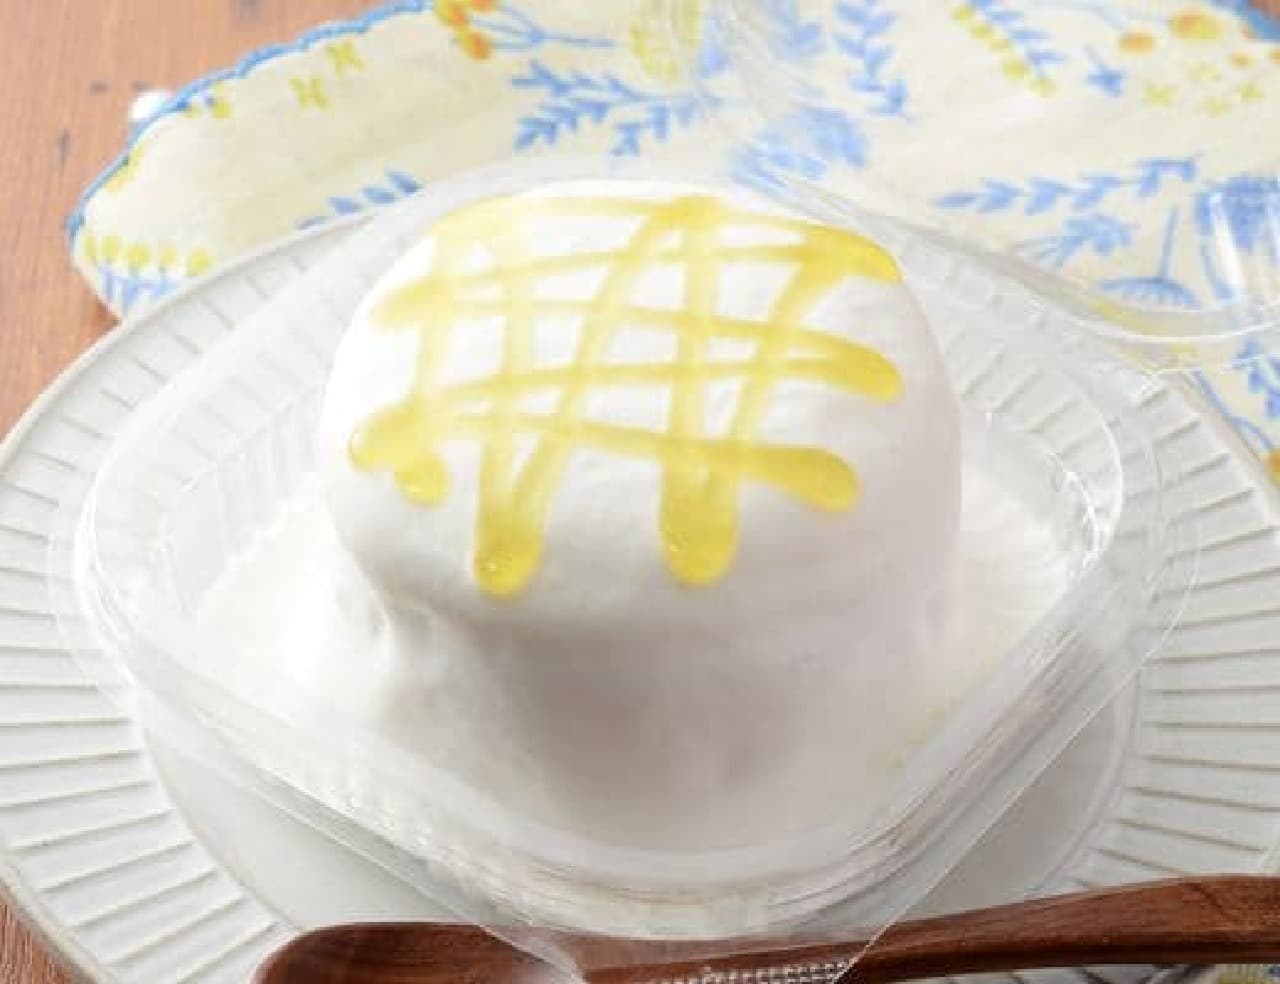 Lawson "Pancake with Drowned Cream (Honey)